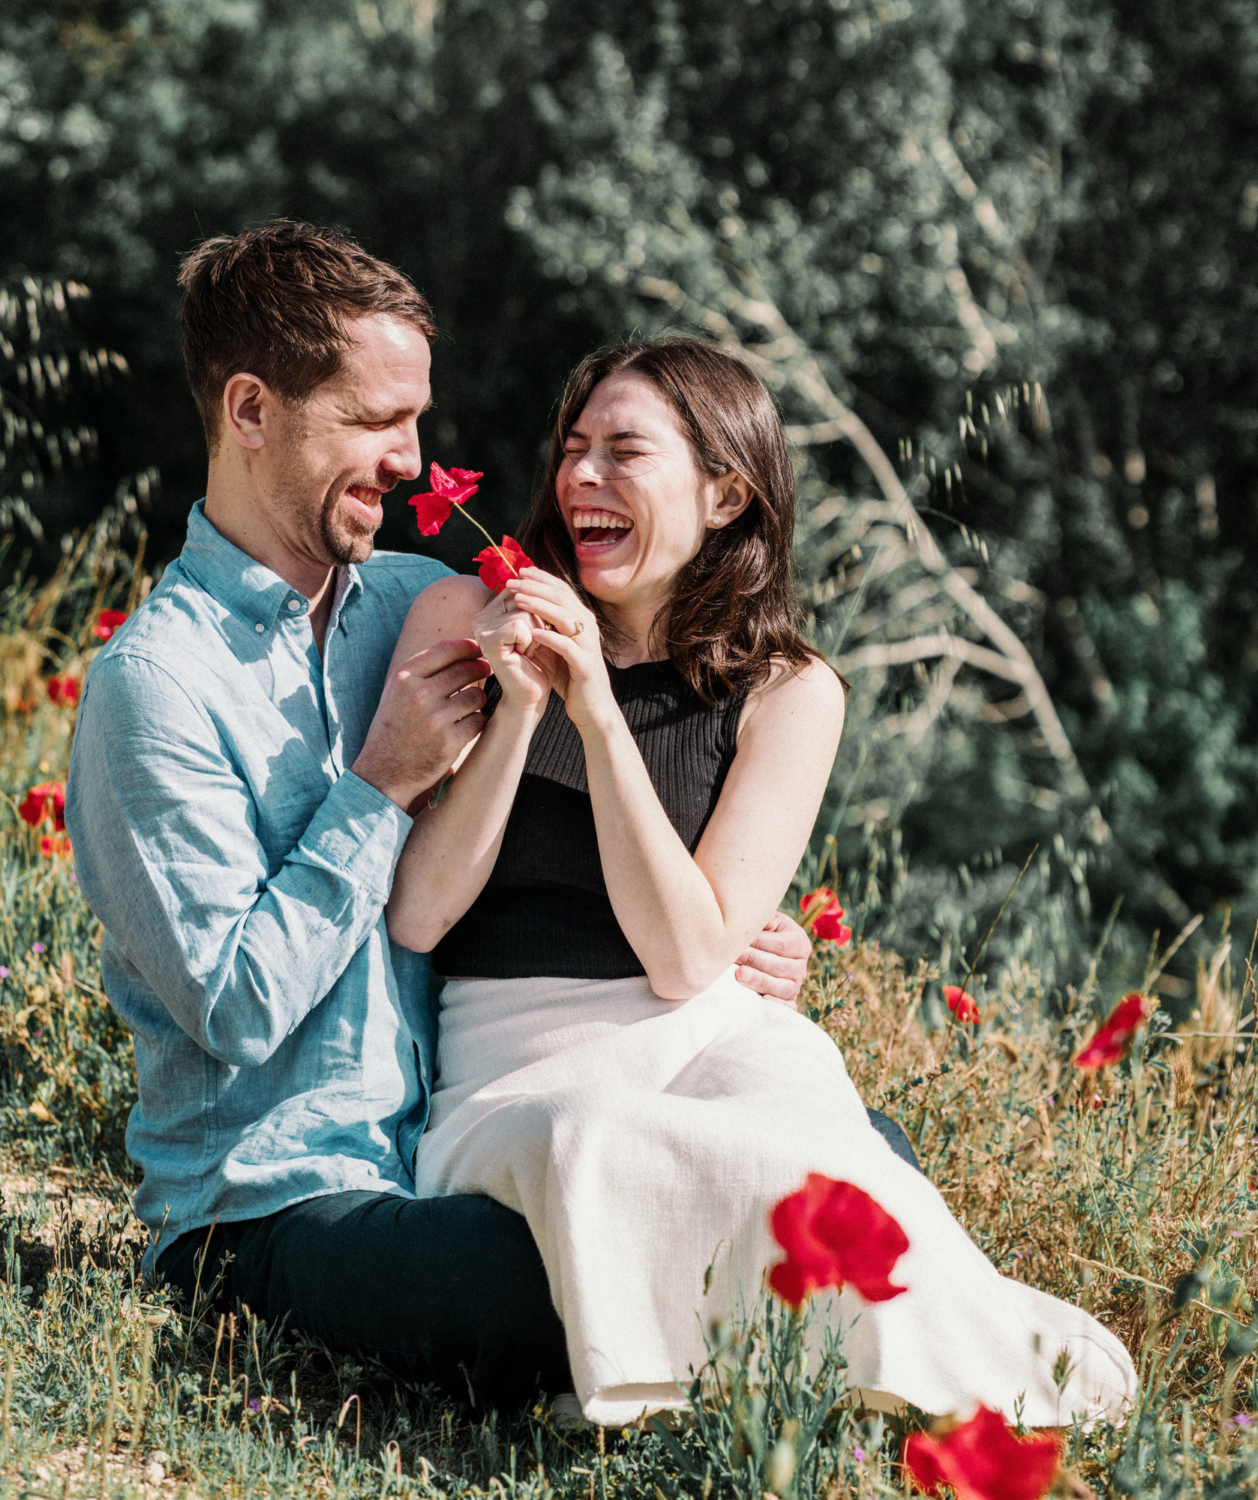 couple hold poppies and laugh